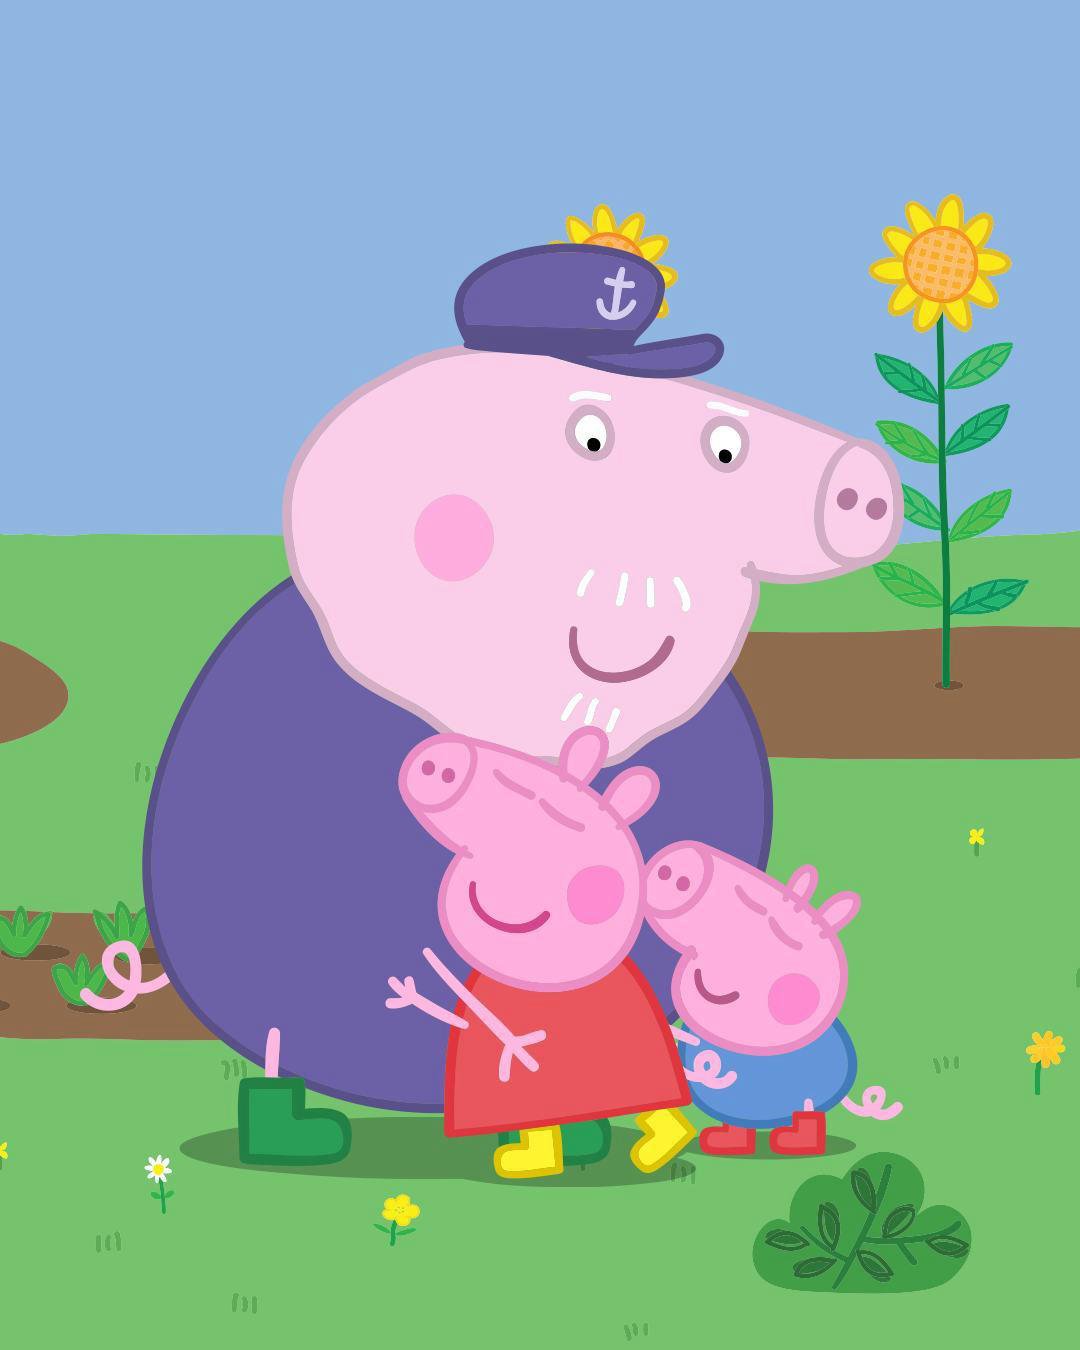 Peppa Pig - A little kindness can go a very long way